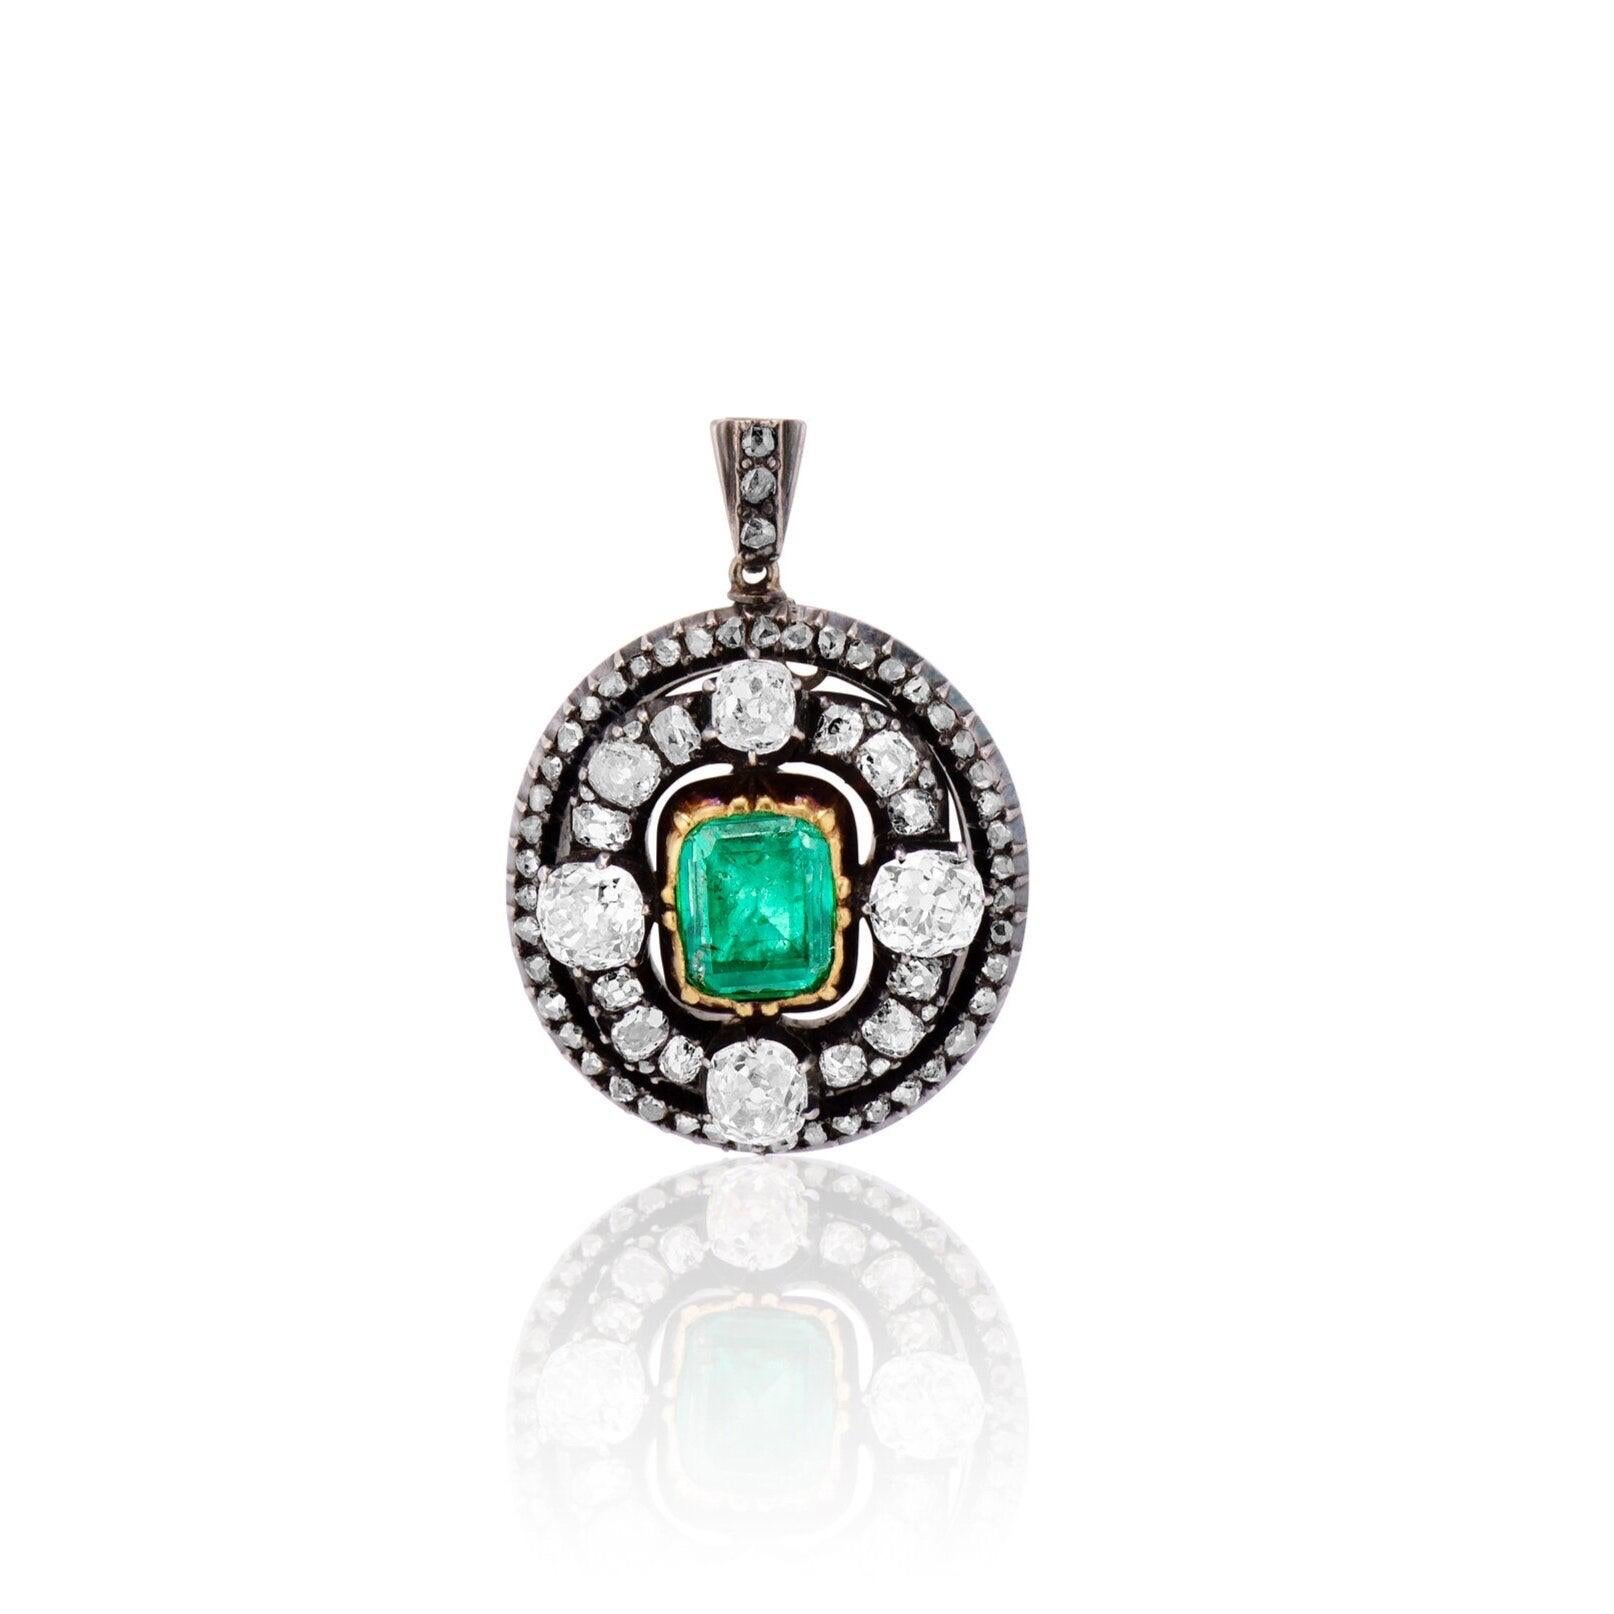 This regal mid-19th century pendant centers on a gorgeous green foil backed emerald beautifully collet-set in gold. The emerald is presented in a sparkling frame of antique cushion cut diamonds with 2.20ctw at its cardinal points, and encircled in a